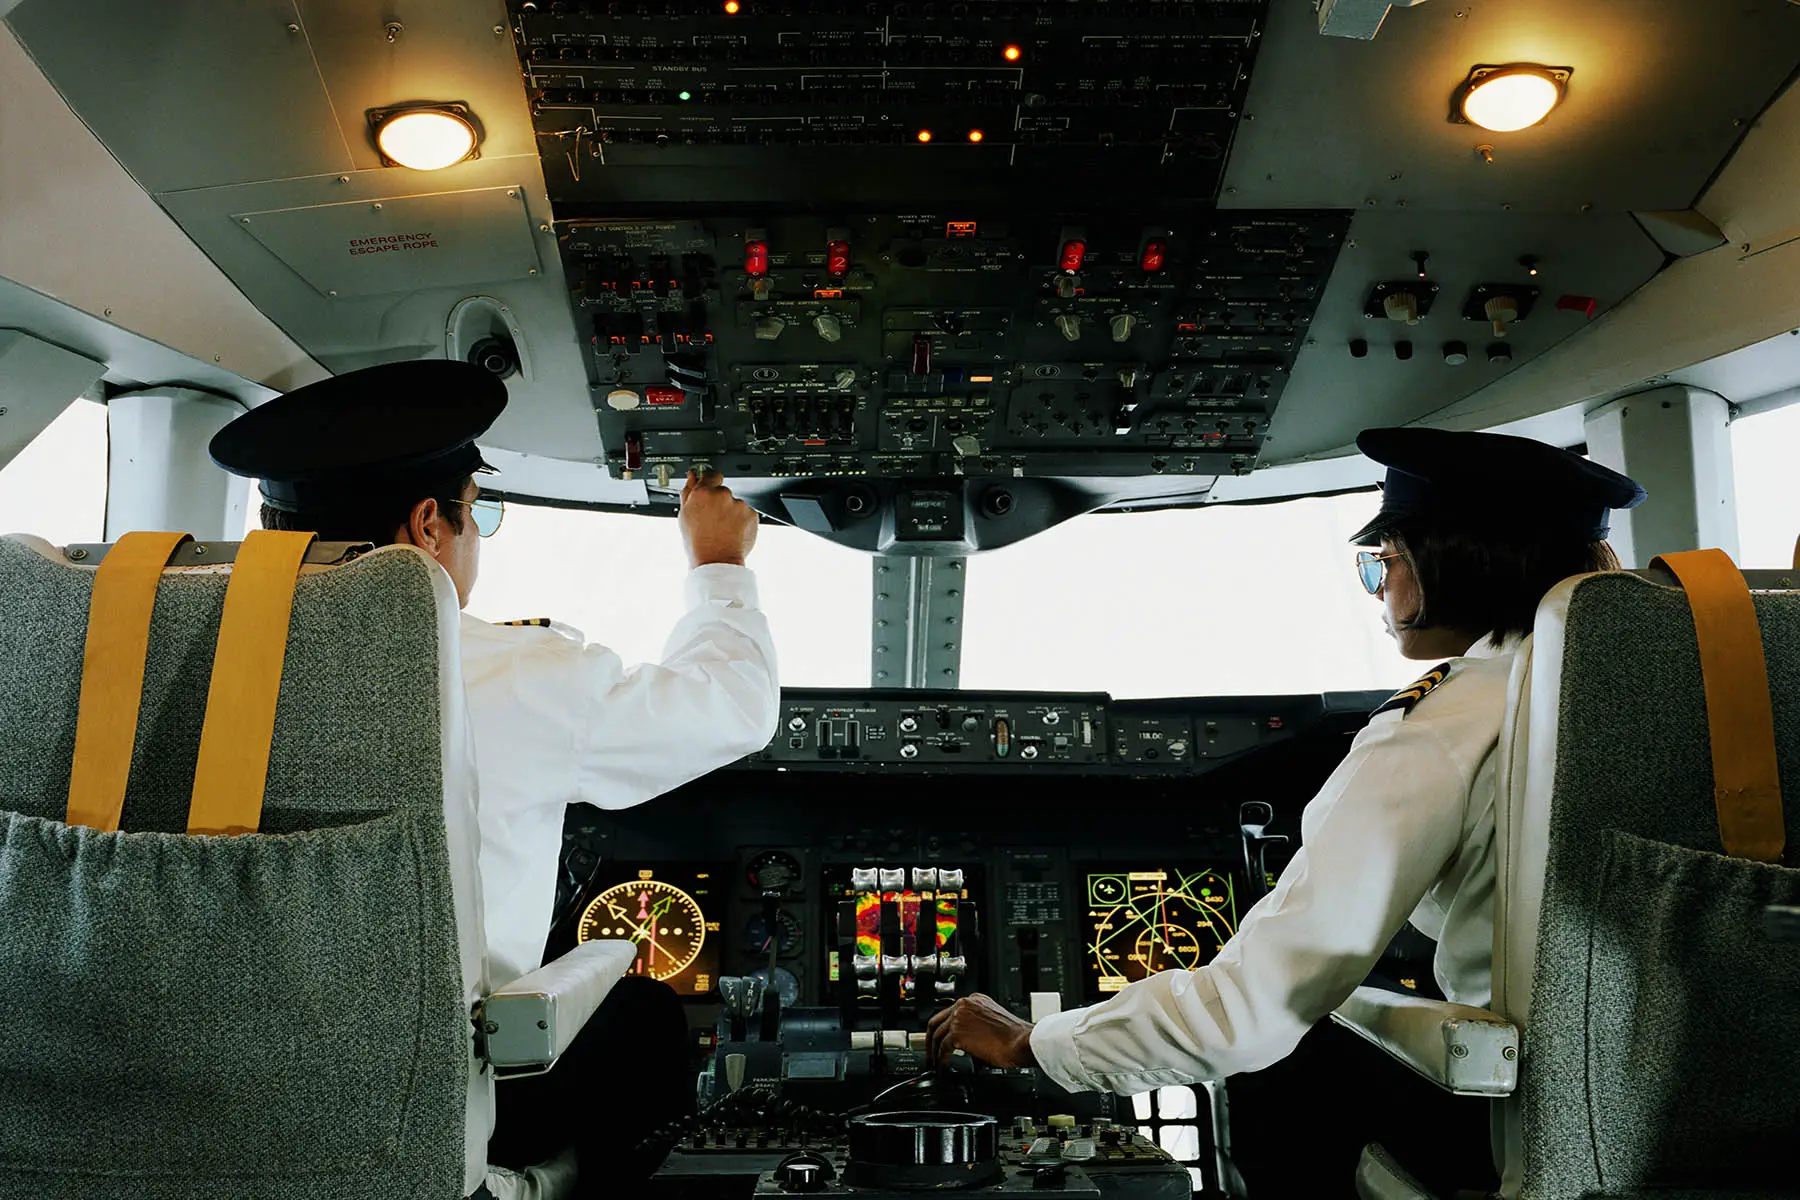 Pilots - one male, one female - in the cockpit of an airliner